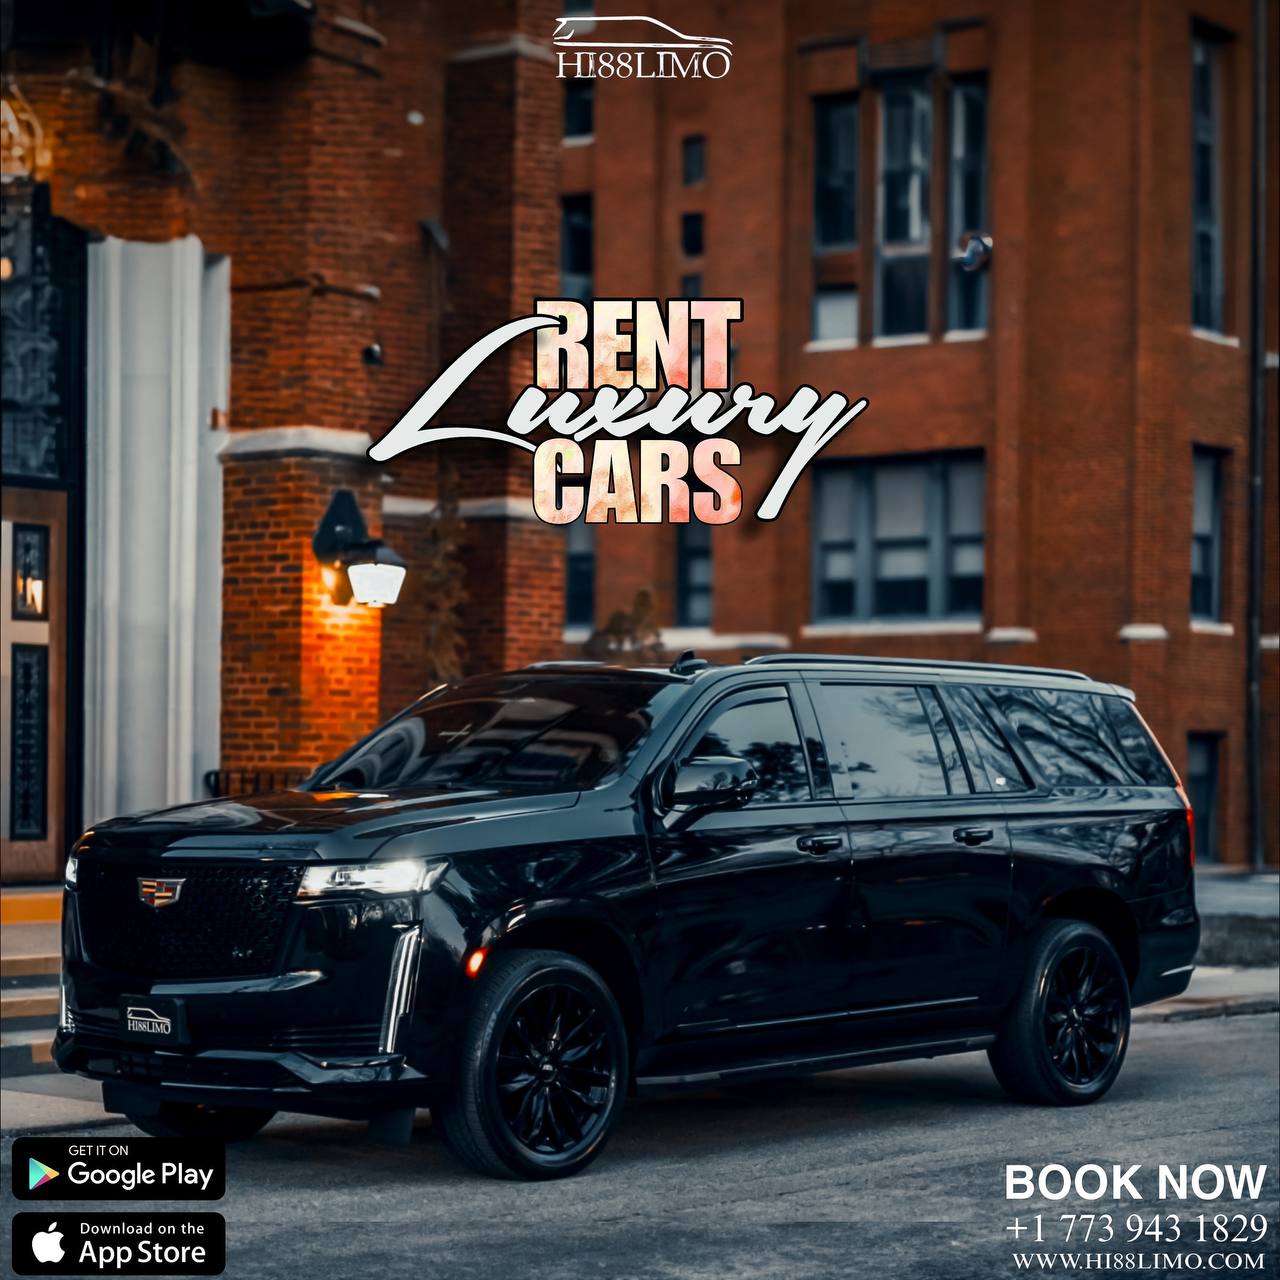 Chicago's Top-Rated Car & Limo Rental Services Company